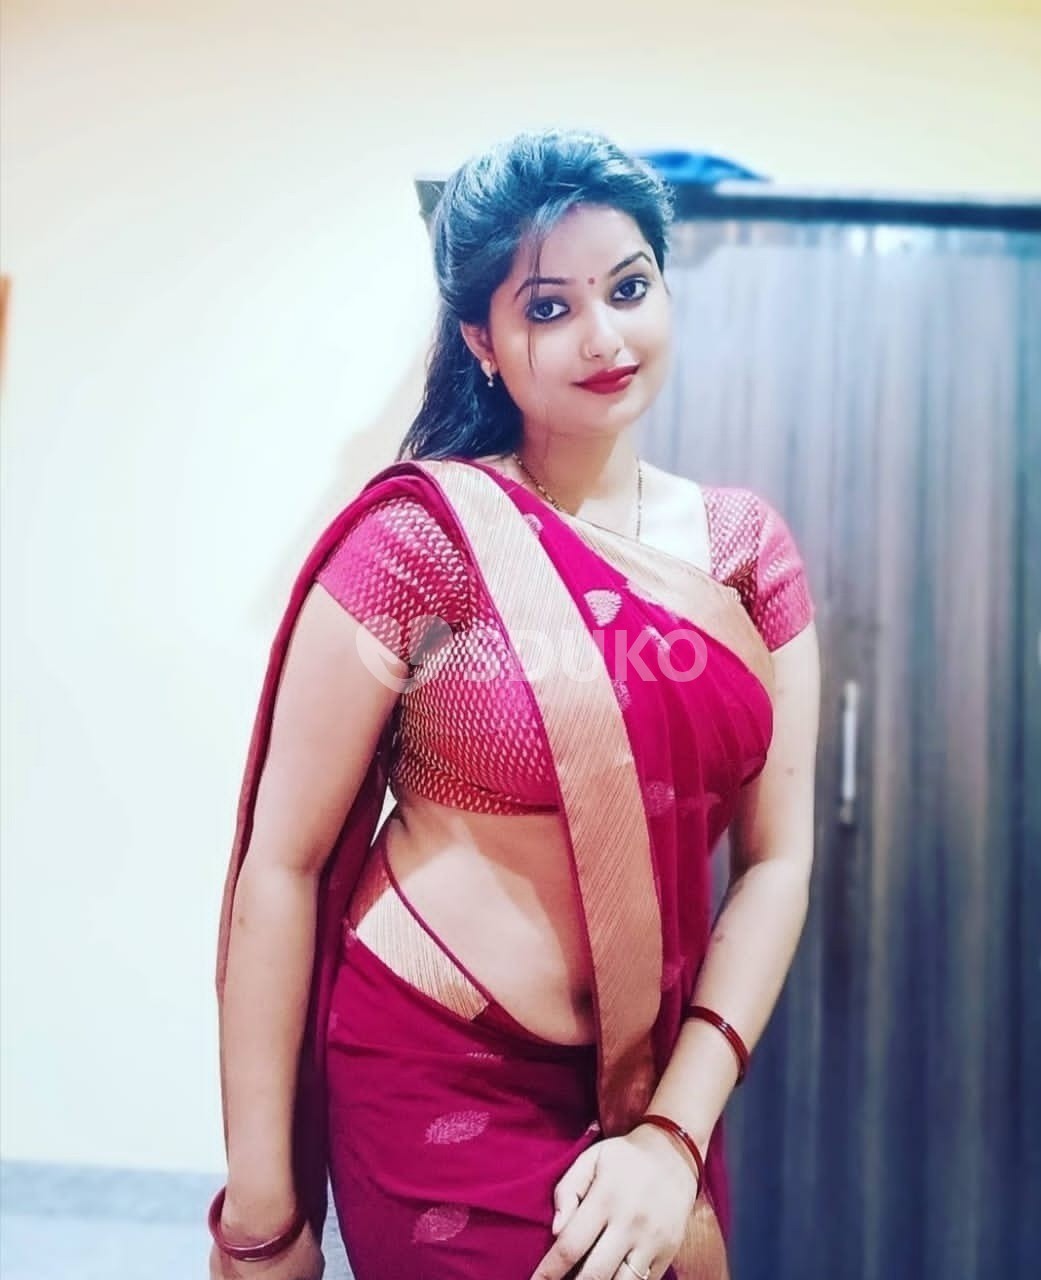 86906/17690 SECUNDERABAD  HYDERABAD ✅ 24x7 AFFORDABLE CHEAPEST RATE SAFE COLLEGE GIRL AVAILABLE IN-CALL OUT-CALL AVAIL